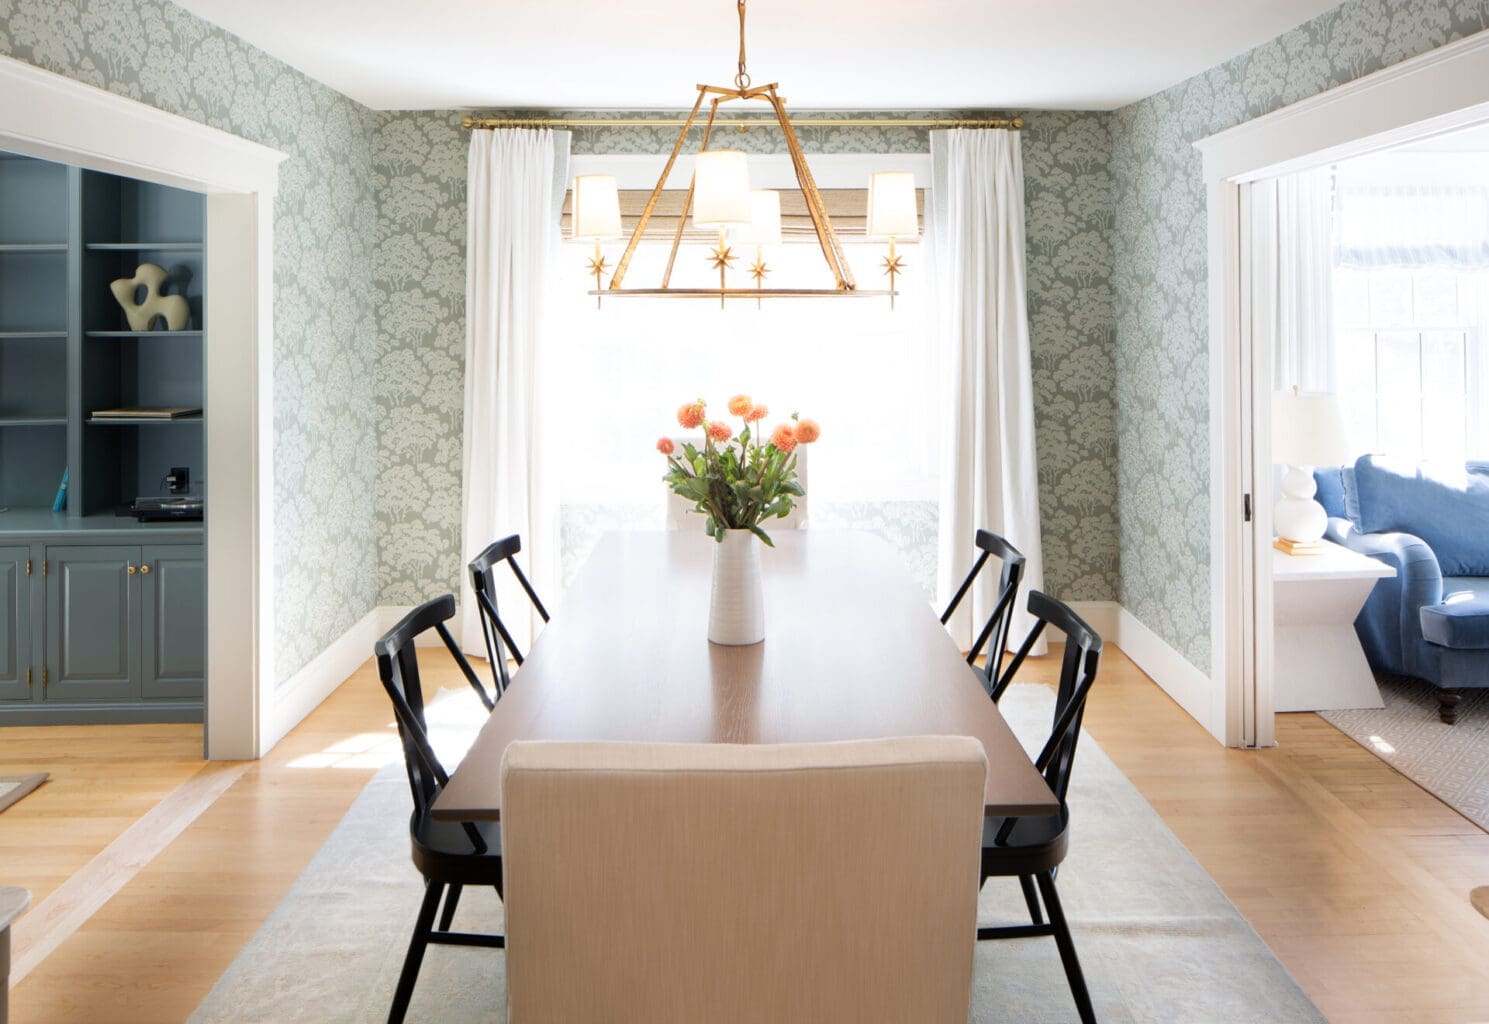 A photo of a dining room with tree-pattern wall paper and pyramid-shaped hanging light fixture.